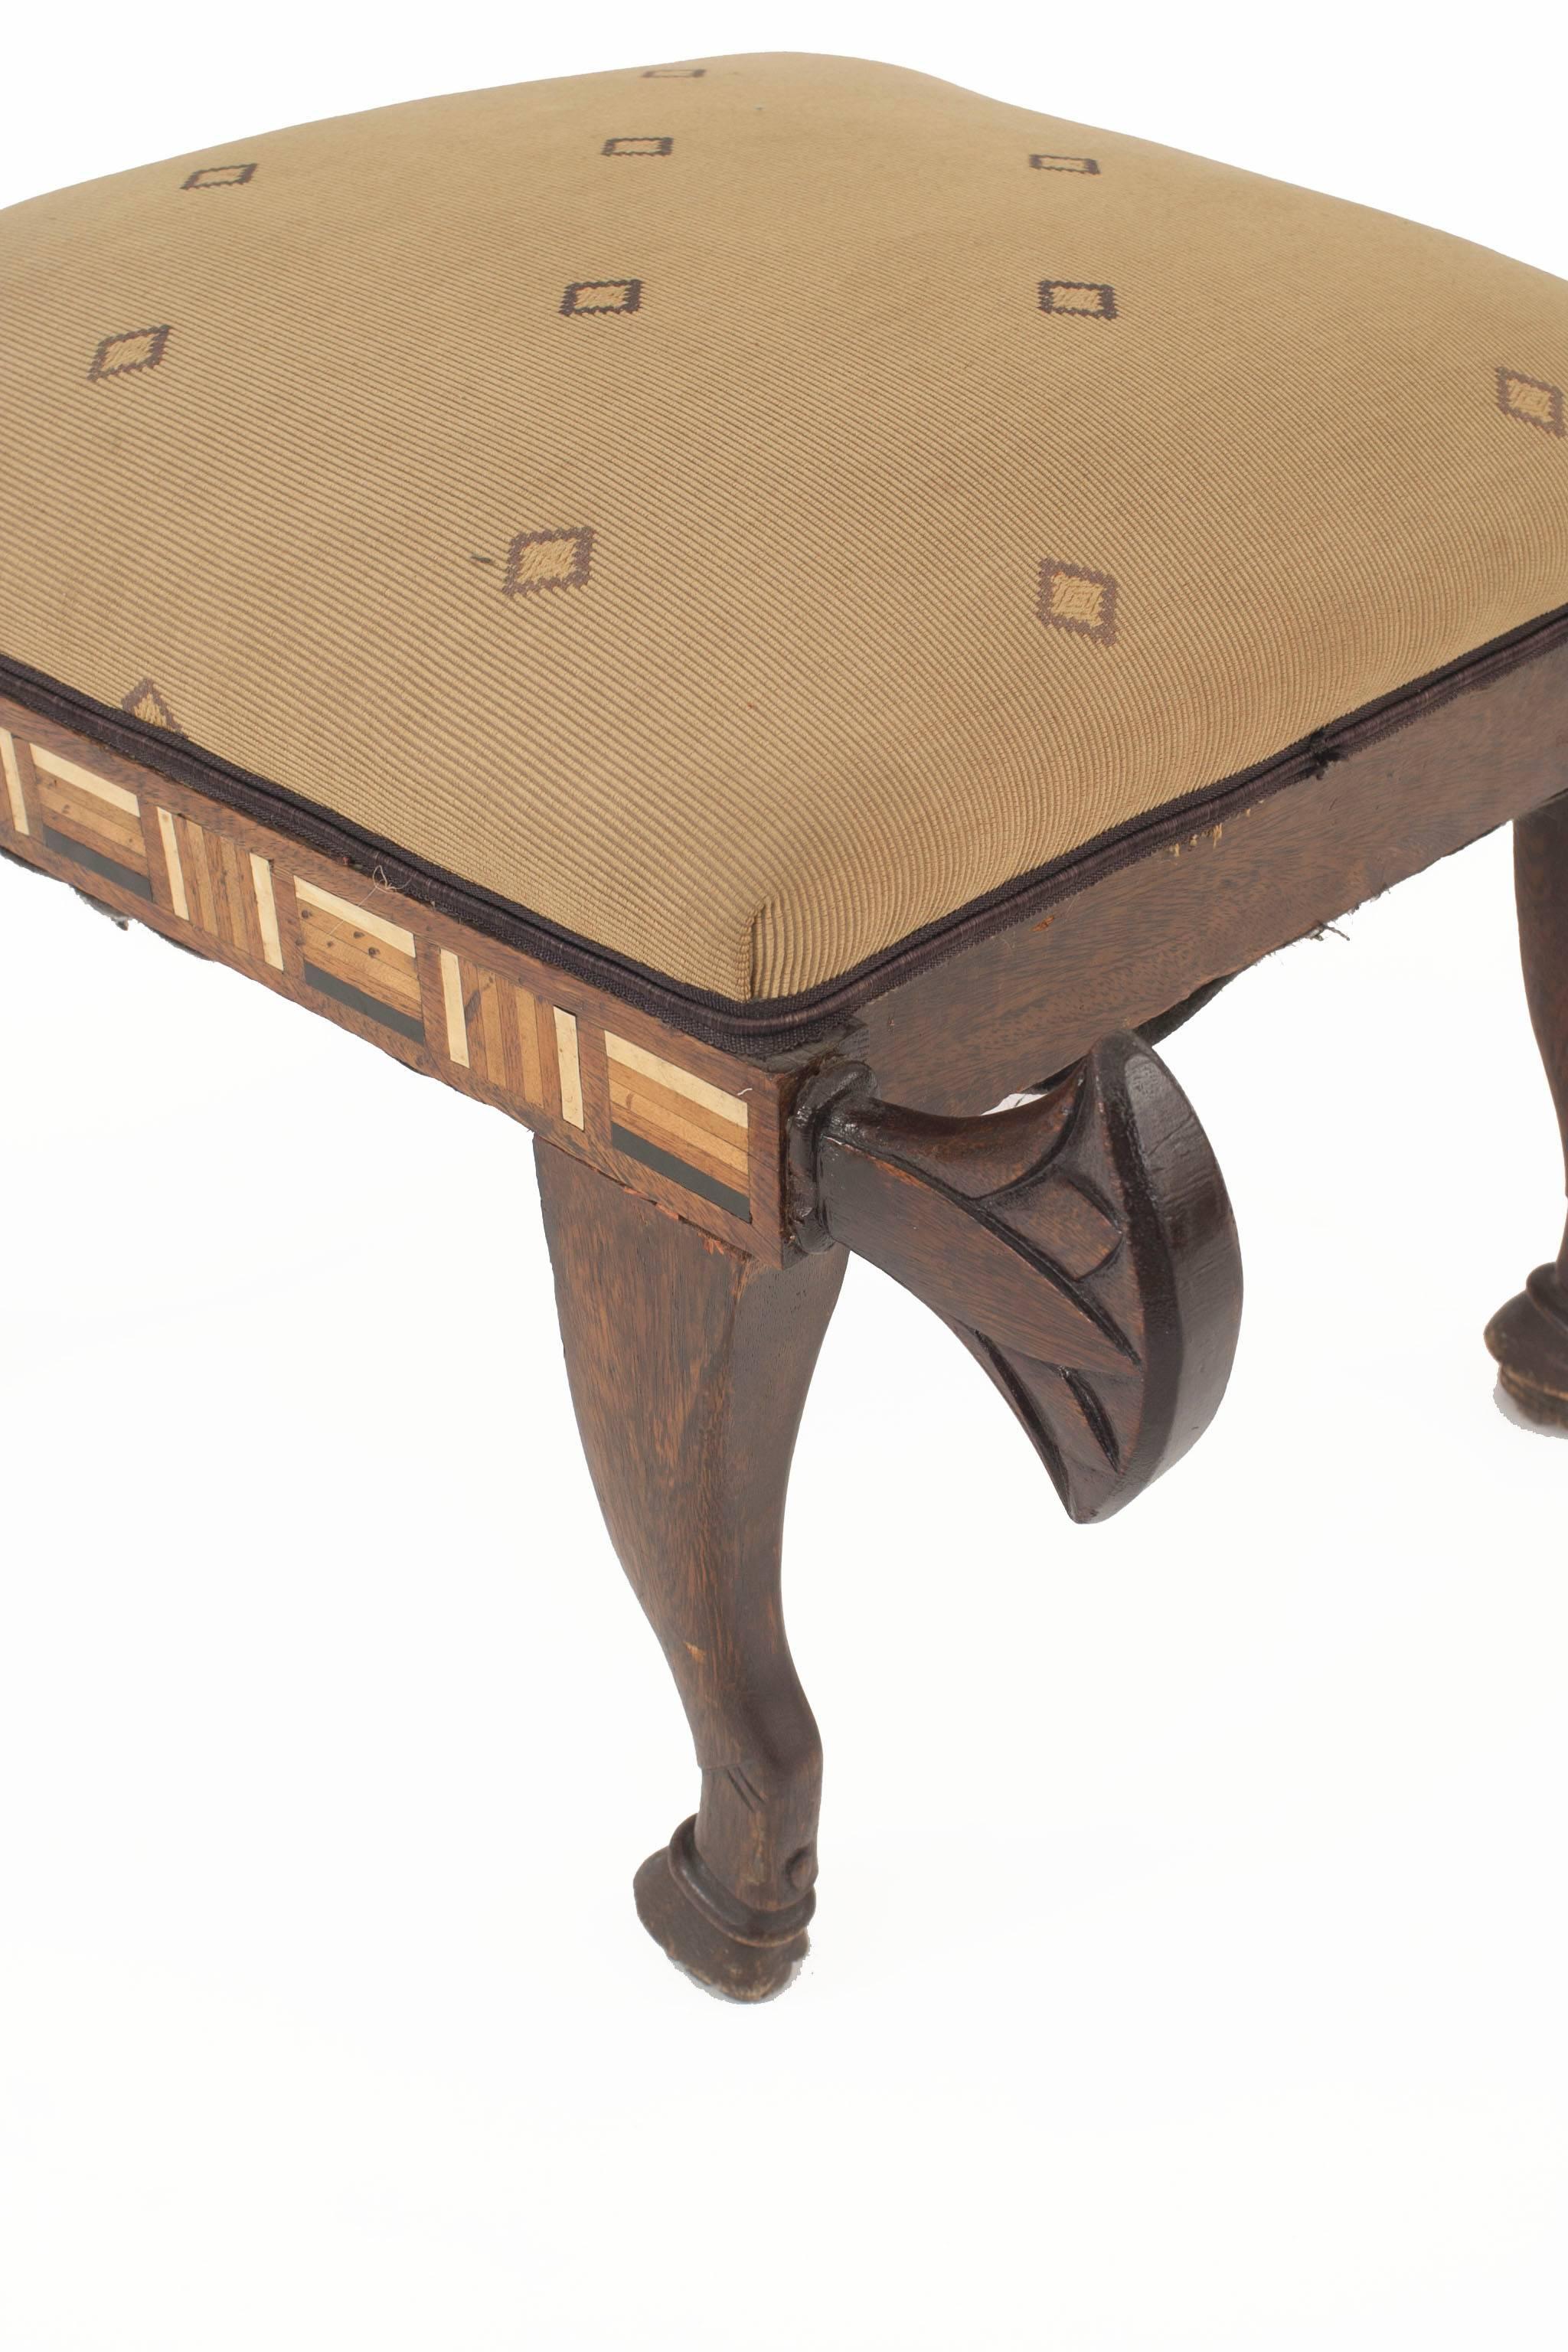 Middle Eastern Egyptian style (19th century English) mahogany bench with pearl, bone, and ebony trim and carved tails.
 